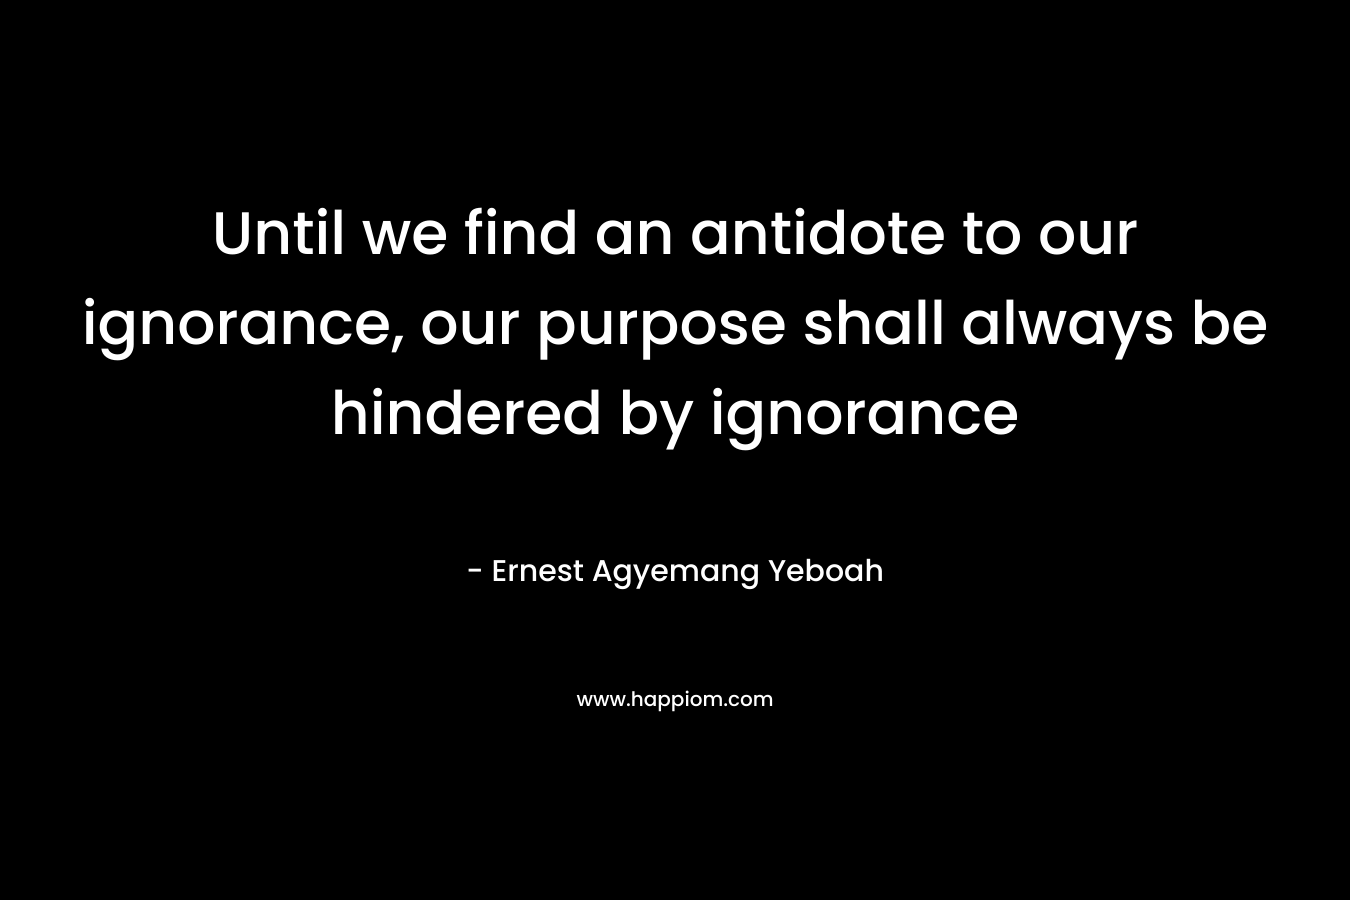 Until we find an antidote to our ignorance, our purpose shall always be hindered by ignorance – Ernest Agyemang Yeboah